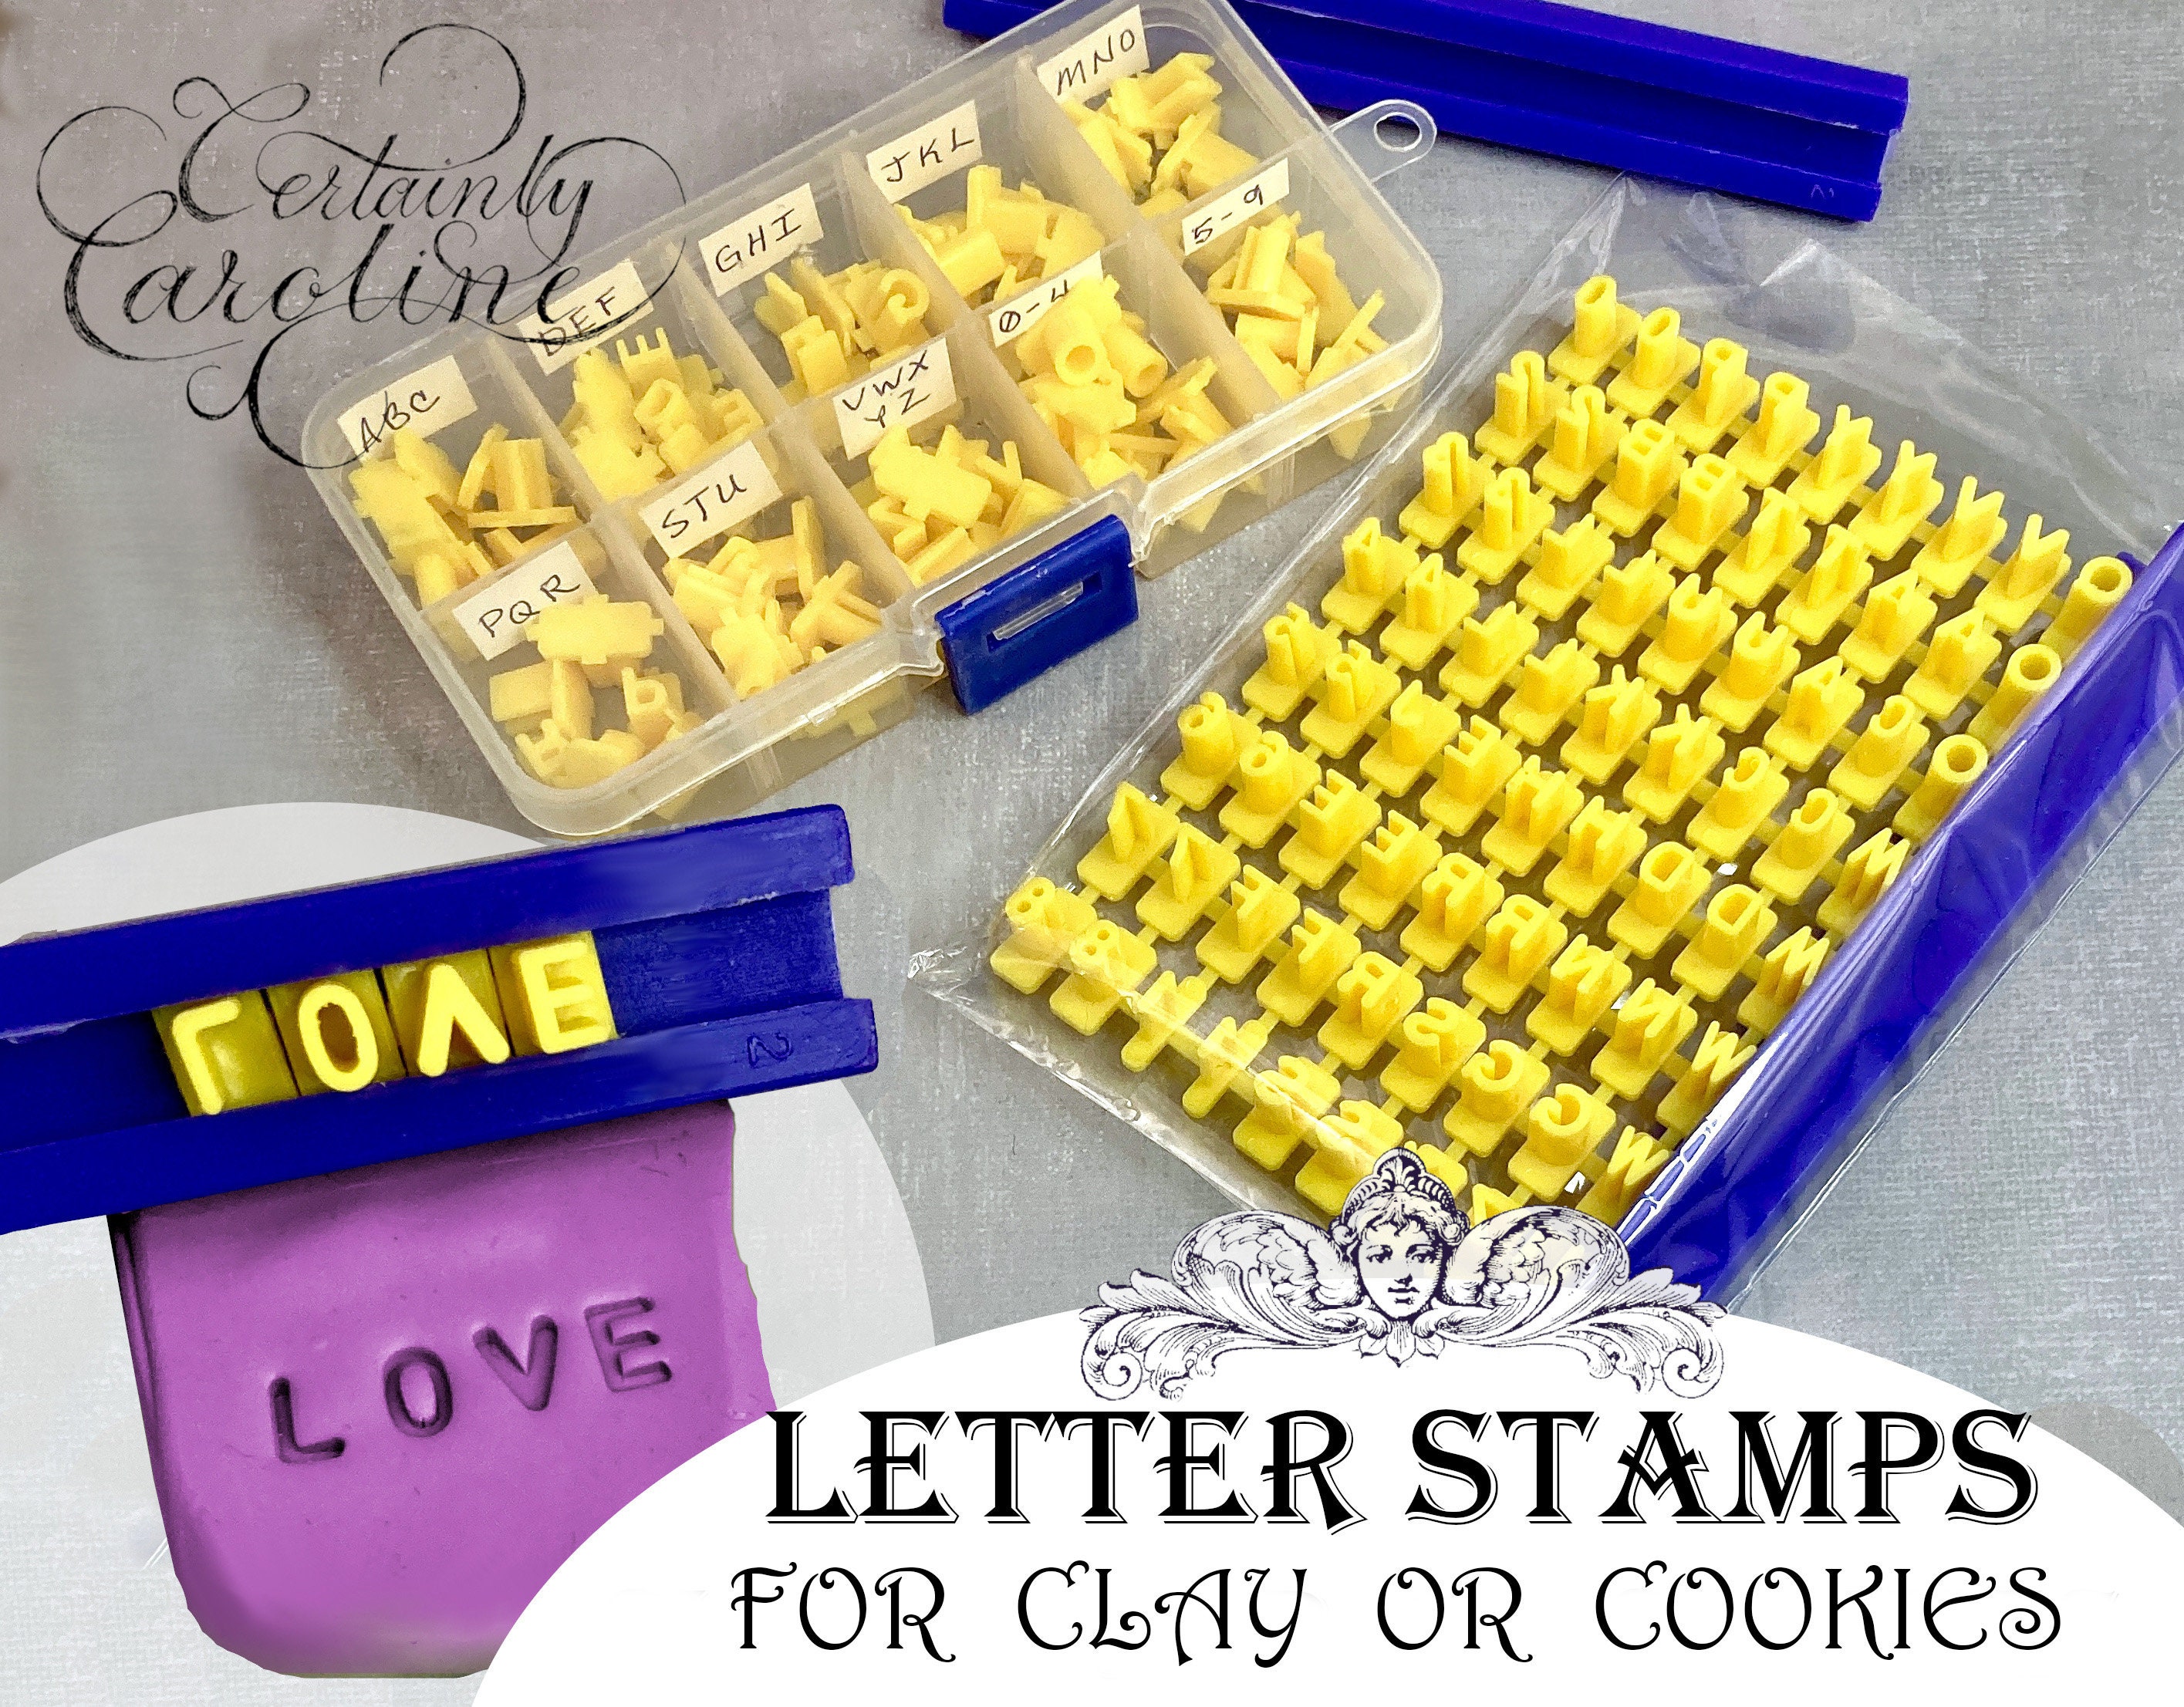 12 Pcs Alphabet Cake Stamp Tool Kit,Aulufft 5 Pcs DIY Cookie Stamp Letters and Numbers Fondant Cake Mold,2Pcs Acrylic Stamping Blocks,5PCS Cake